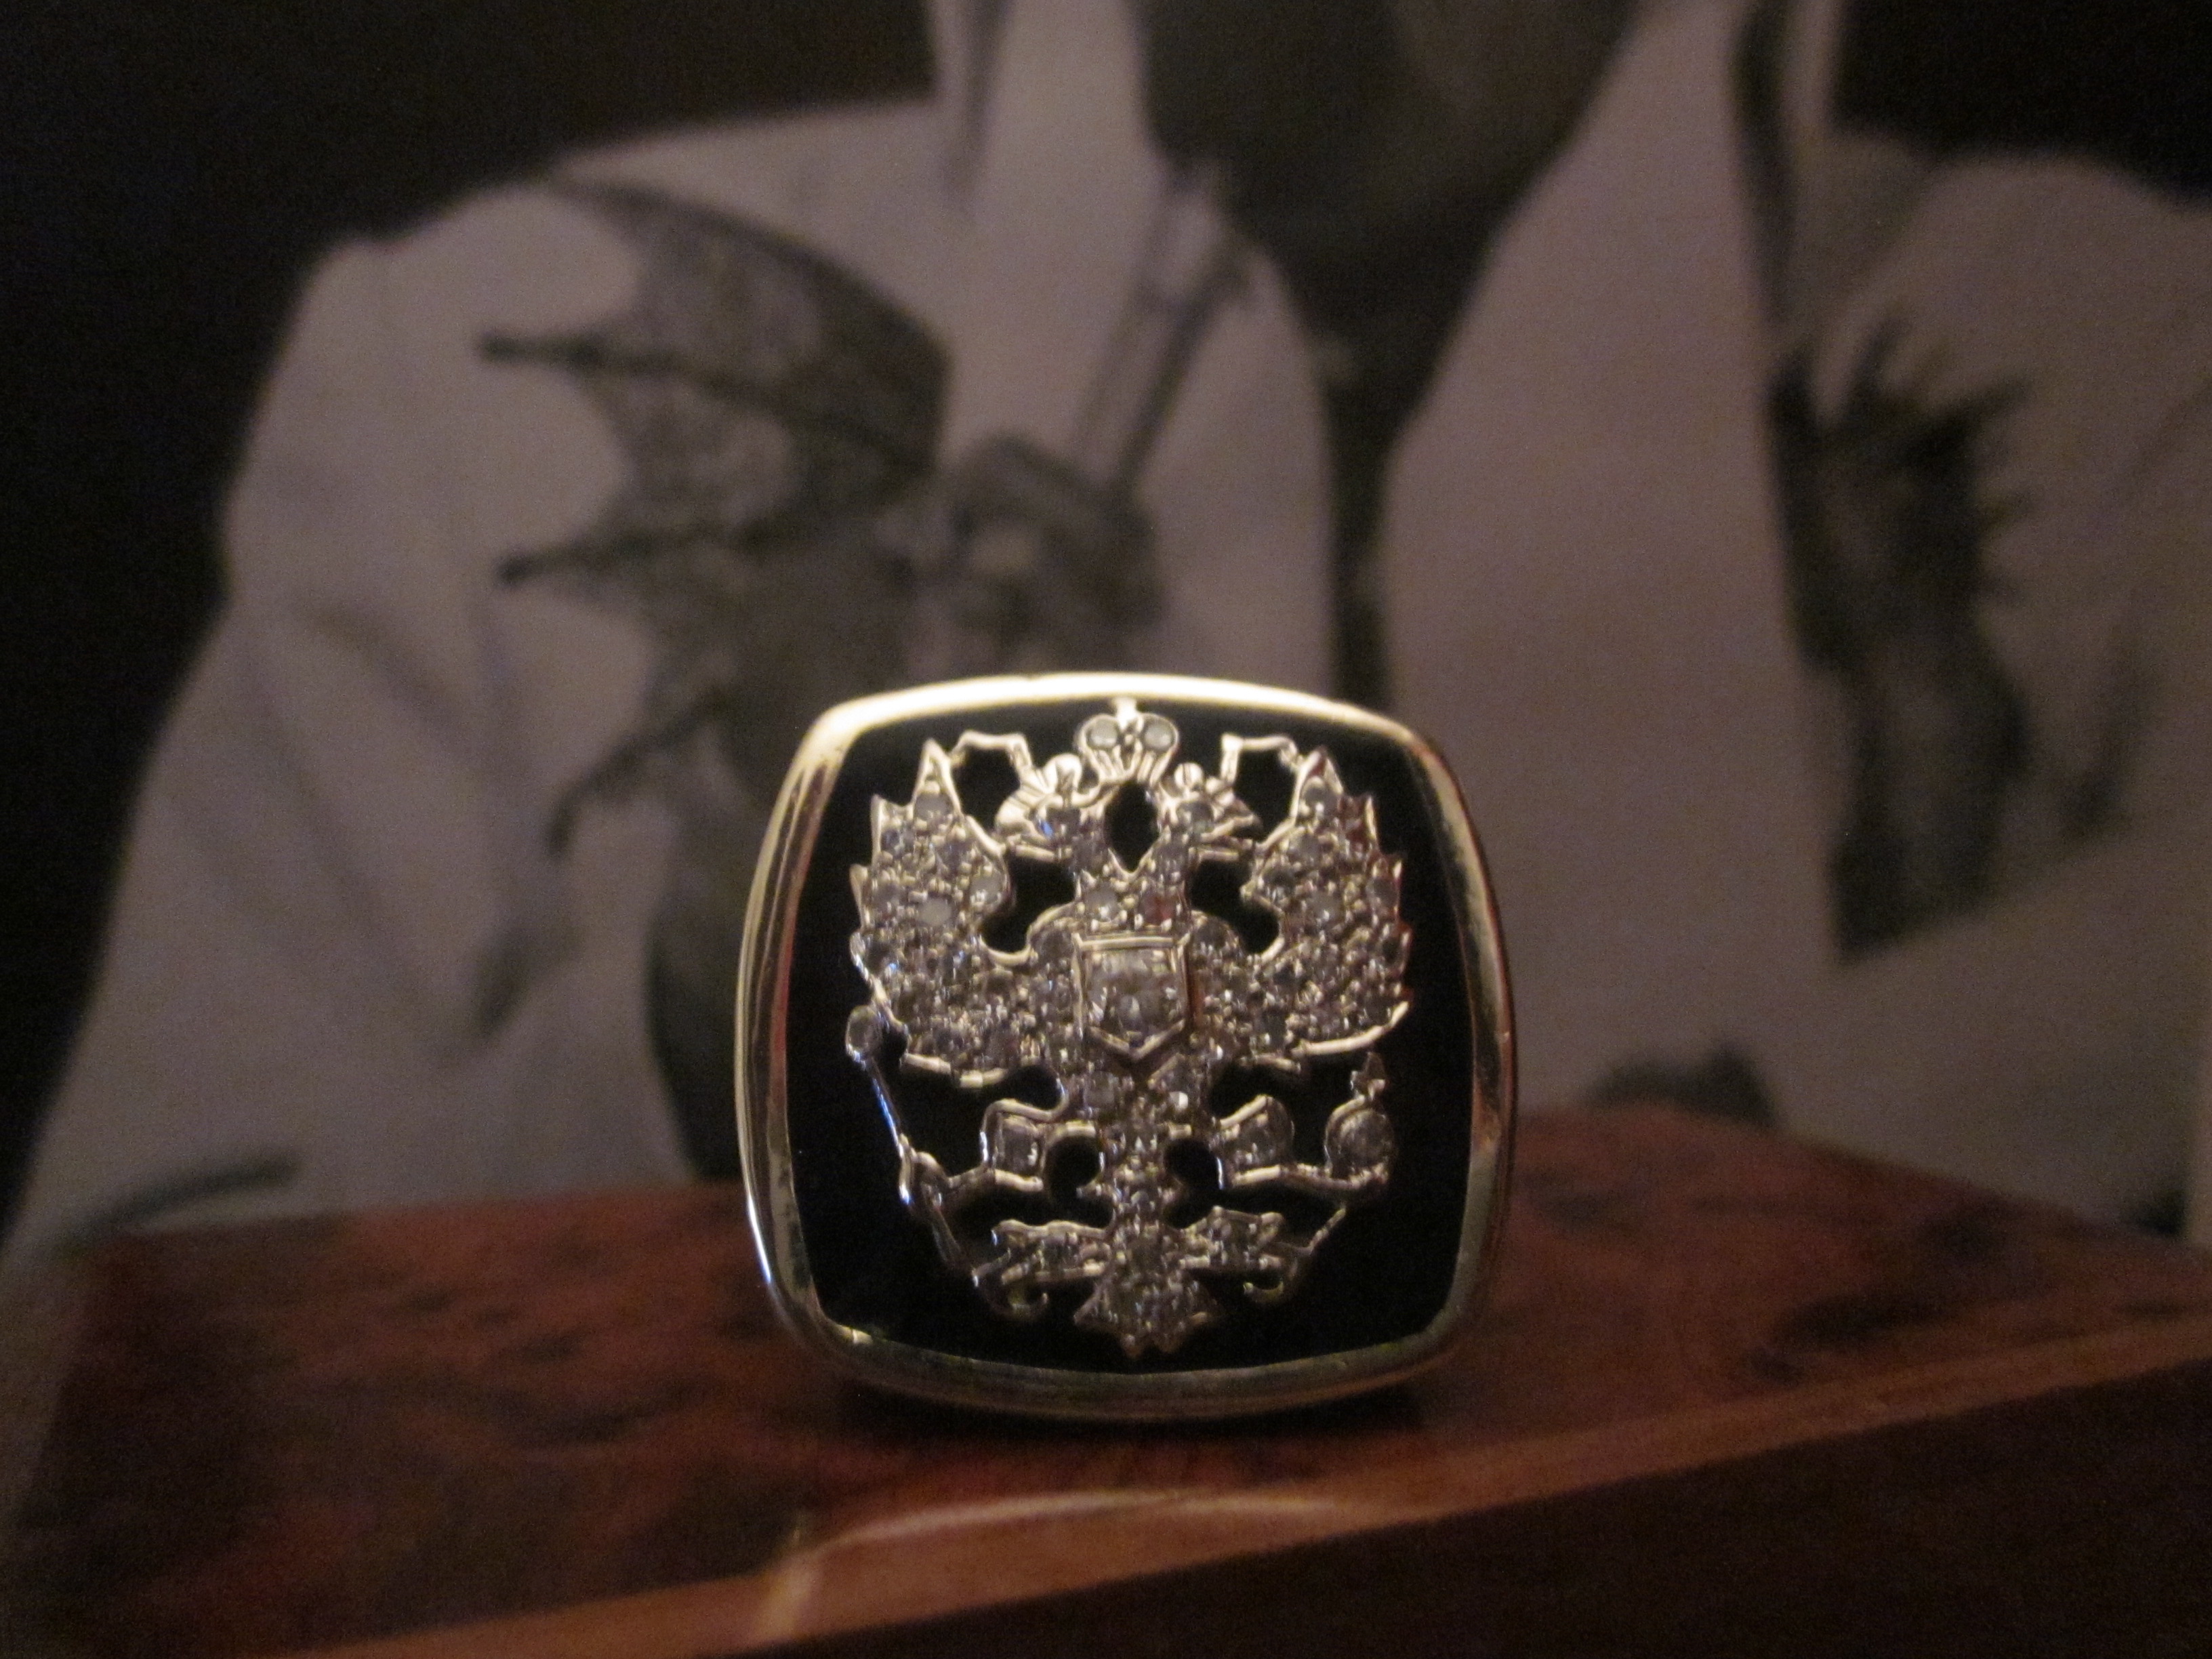 ELVIS PRESLEY - Elvis' famous double headed eagle "Russian Tsar" crest claw ring.  This unique